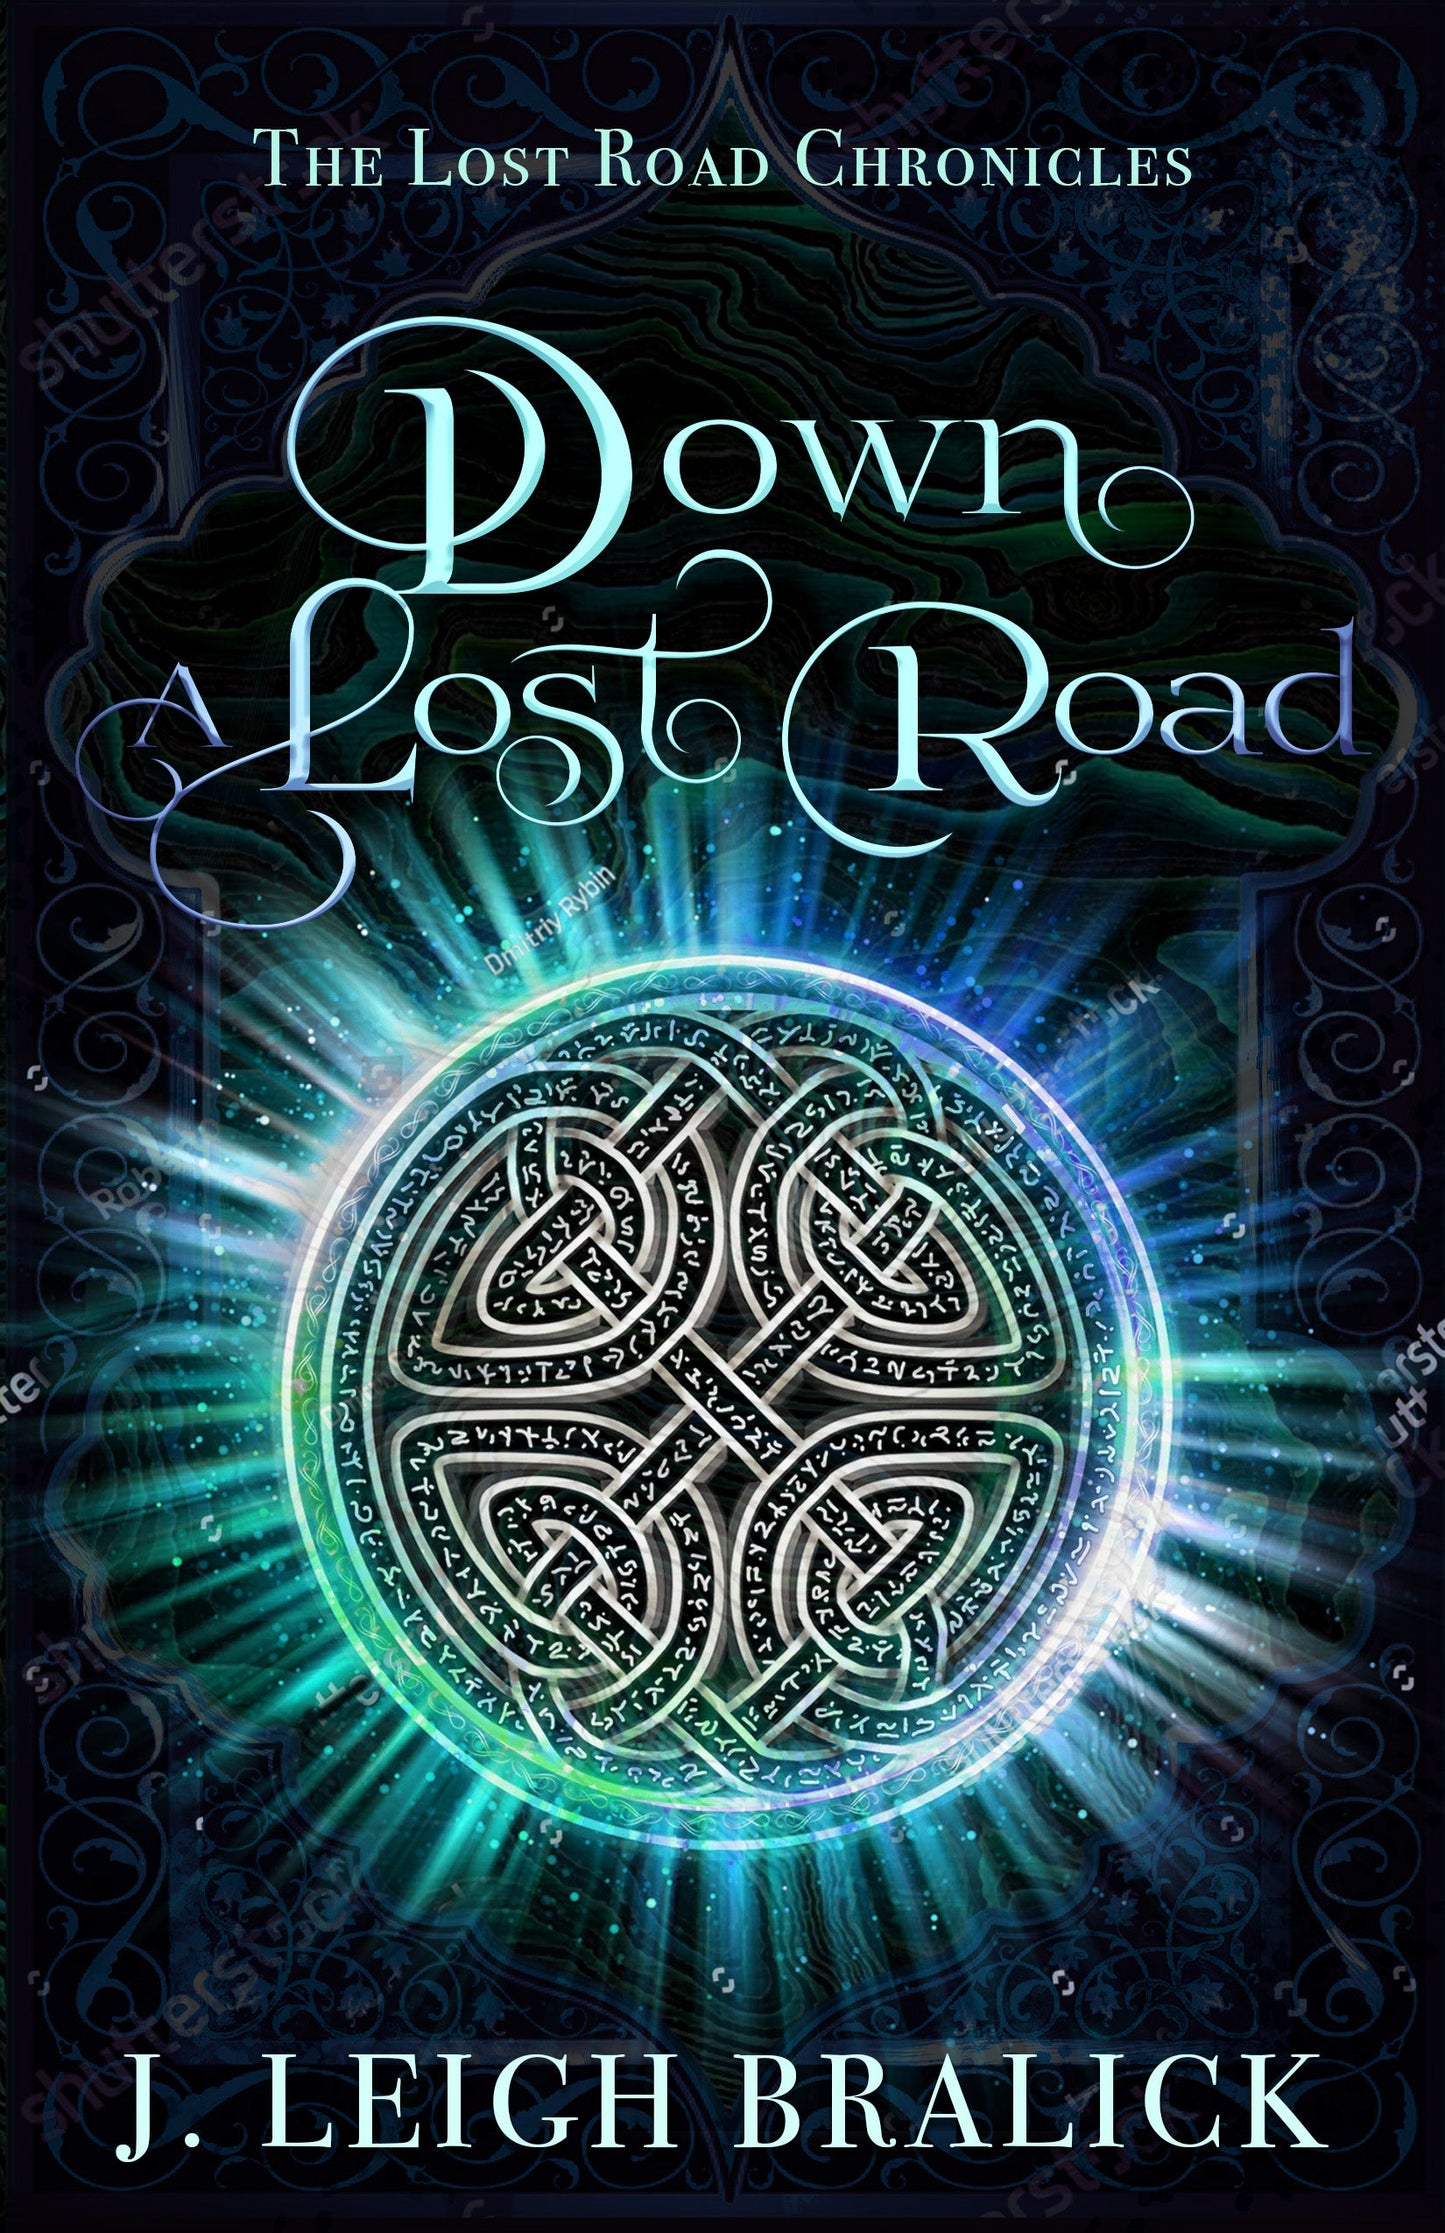 Down a Lost Road (Lost Road Chronicles #1) - SIGNED Hardcover